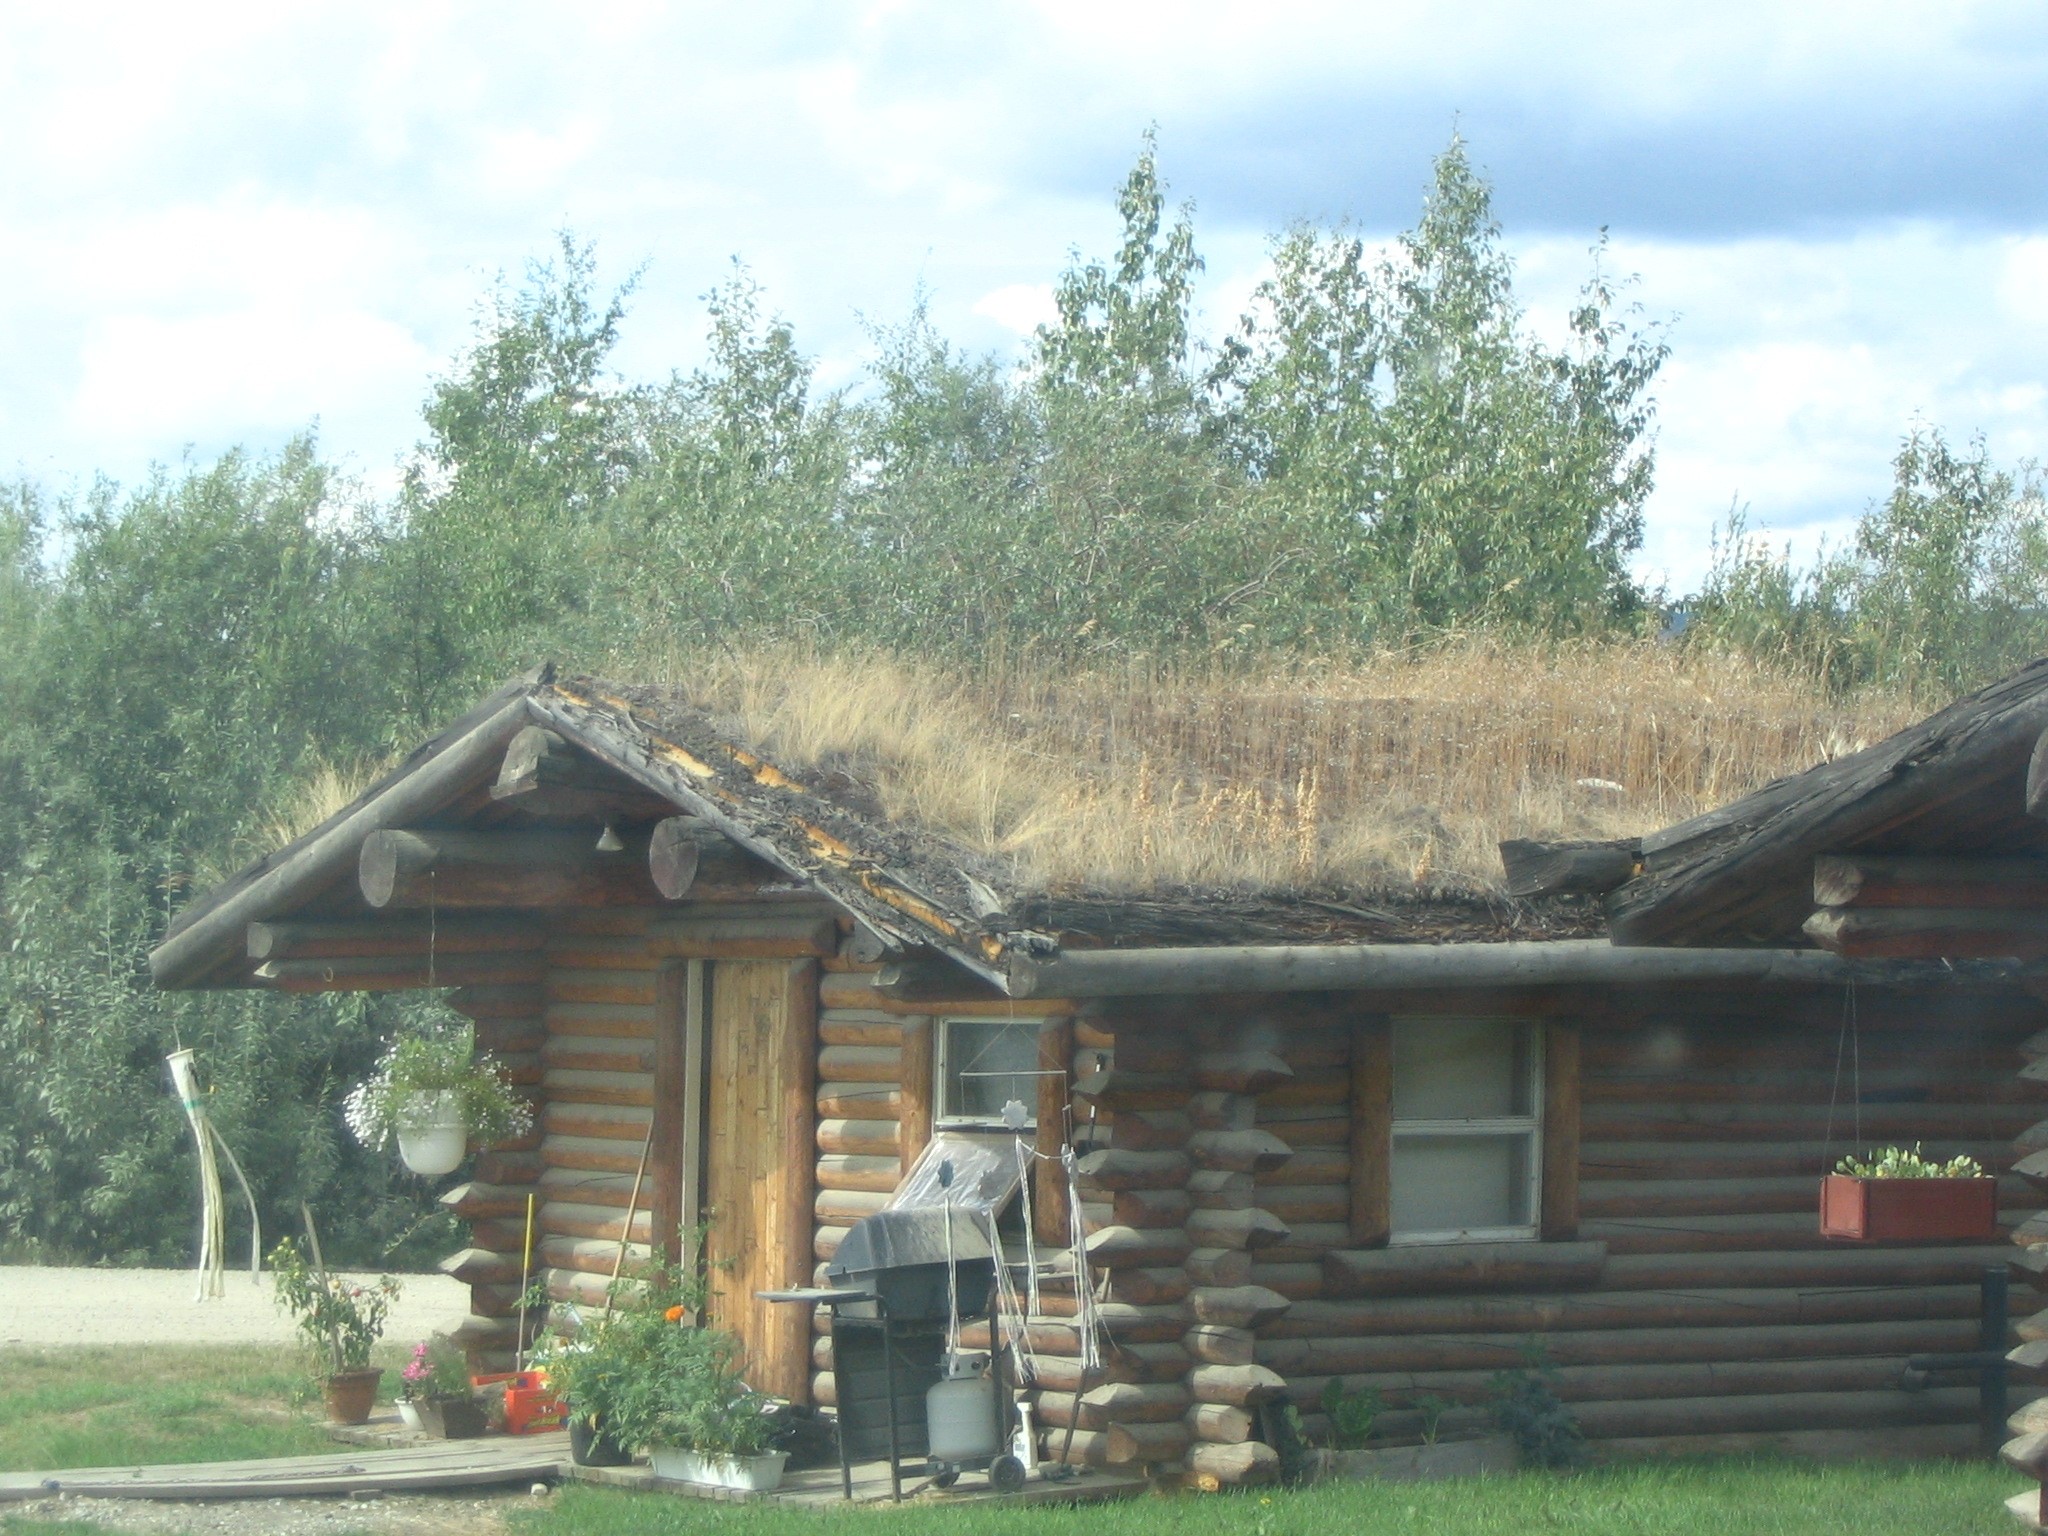 there is an old log cabin with grass on the roof